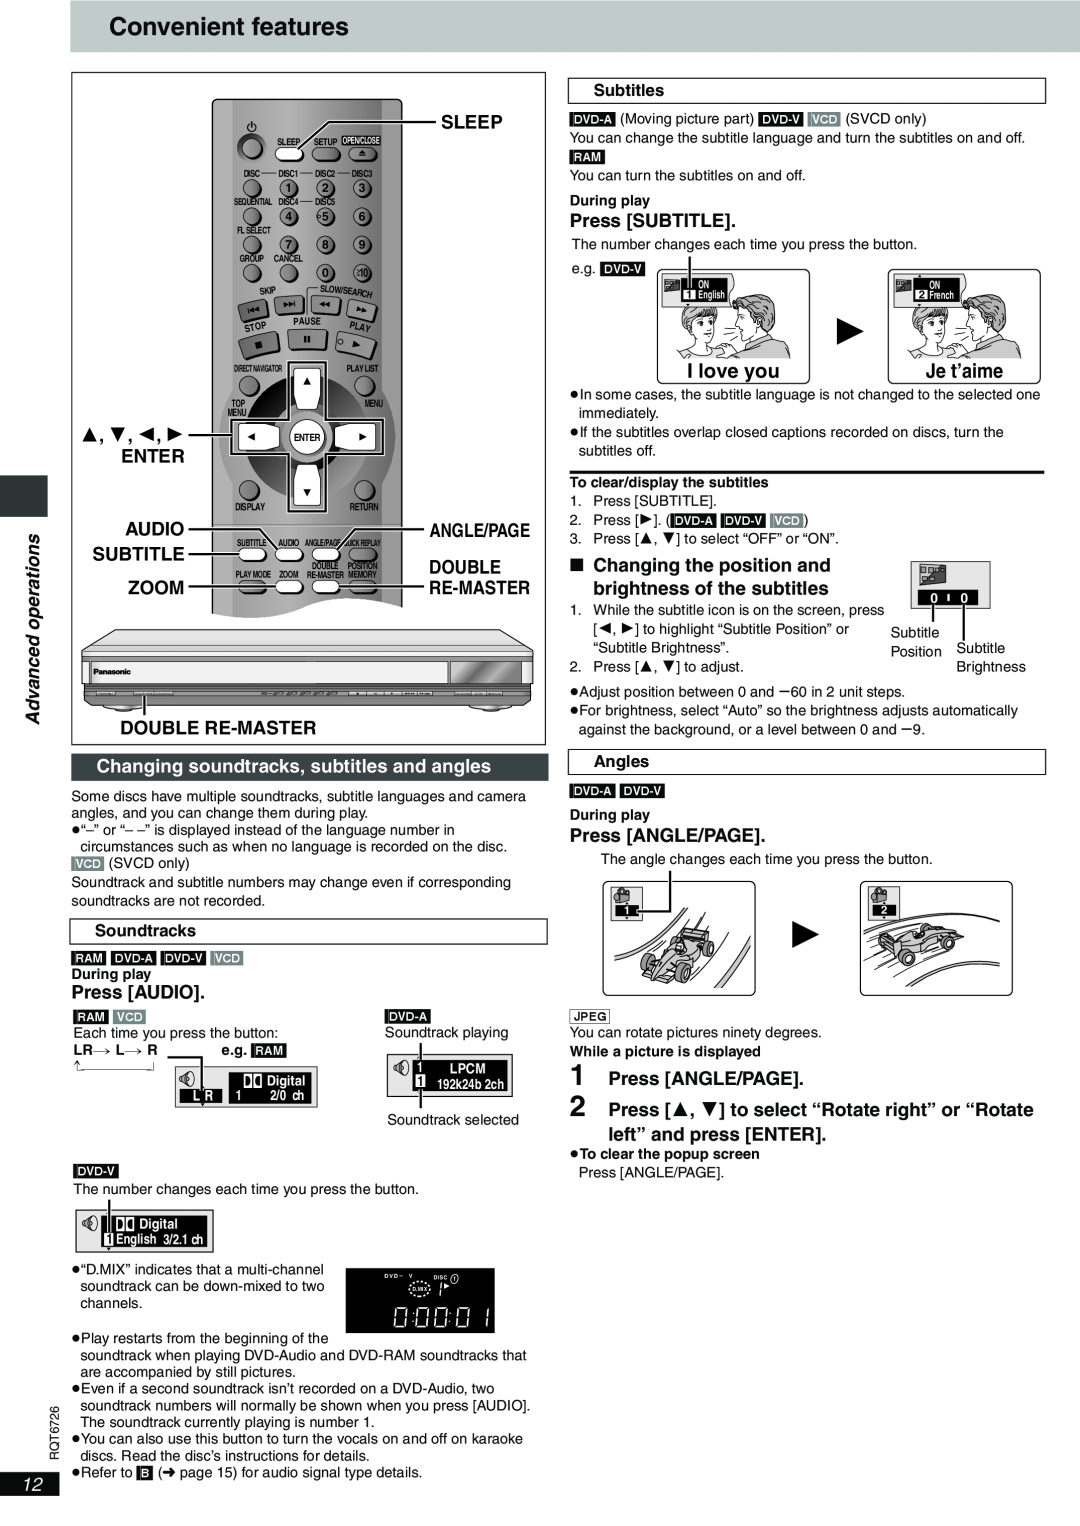 Panasonic DVD-F61 important safety instructions Convenient features, I love you, Advanced, operations 